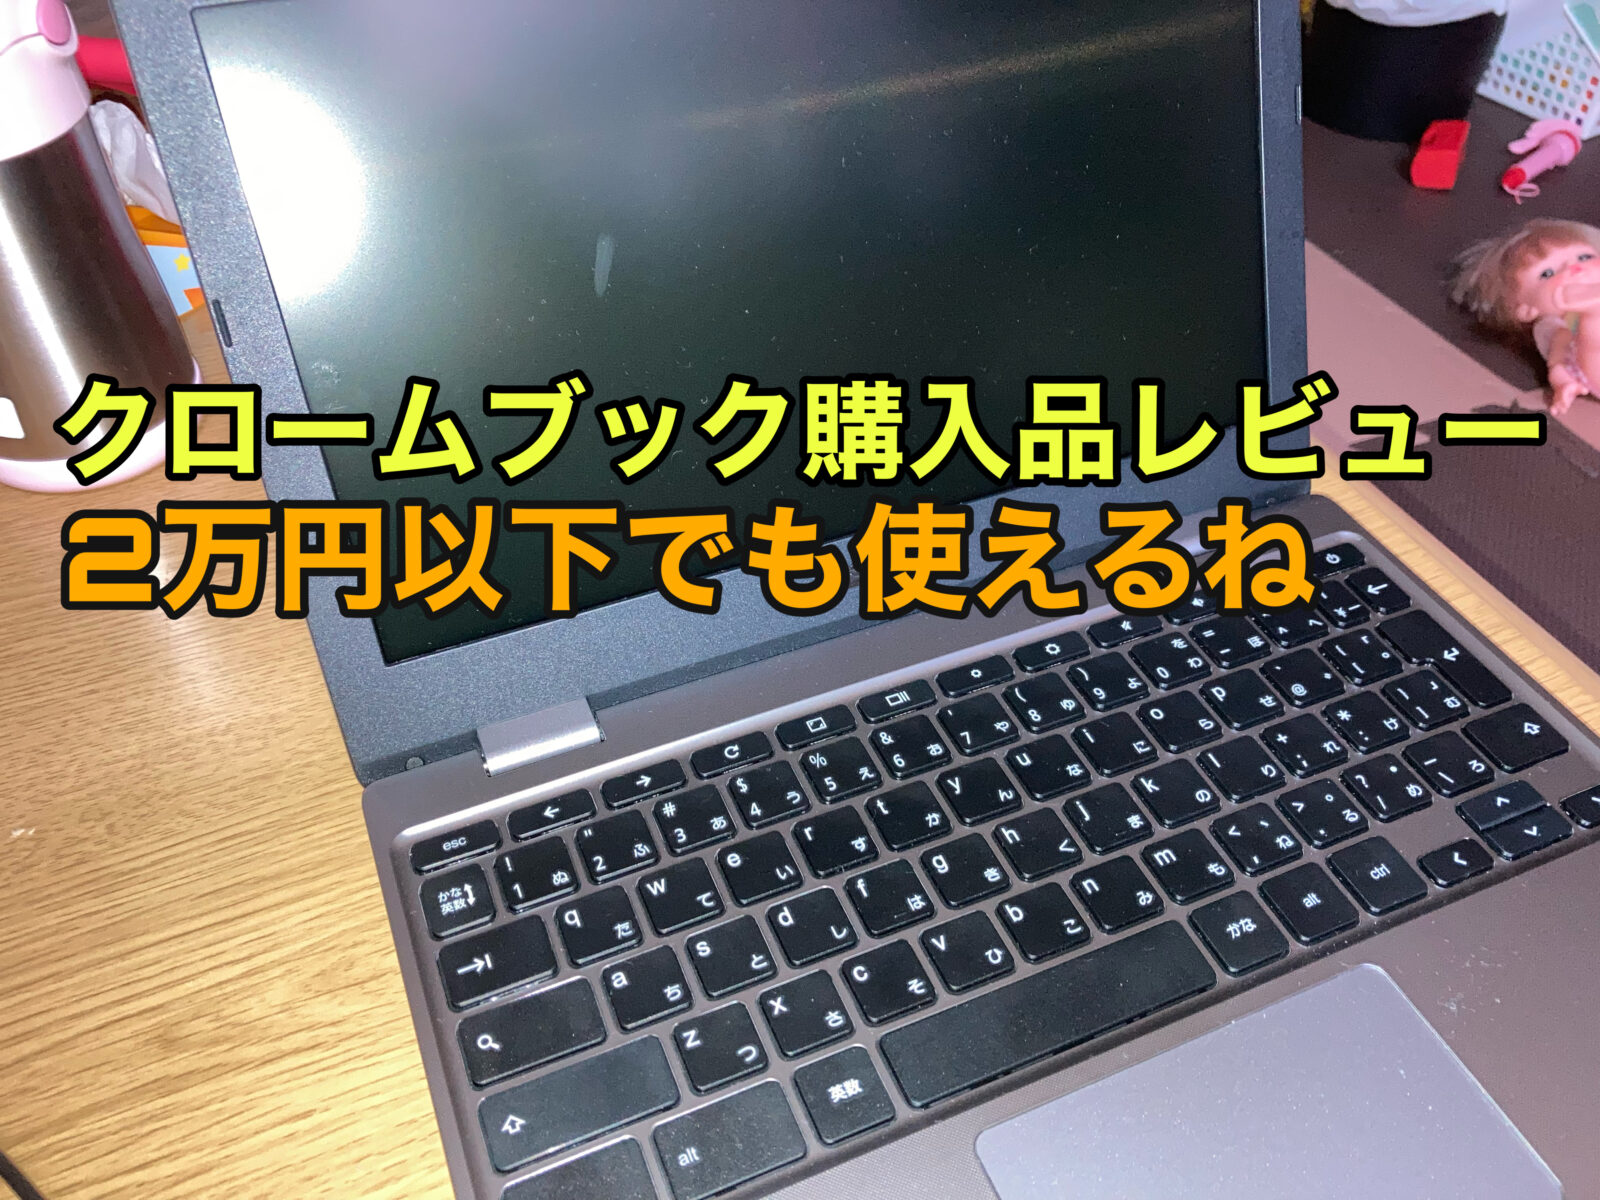 ASUSのChromebook（C223NA）を購入レビュー！2万円以下でも使えるね